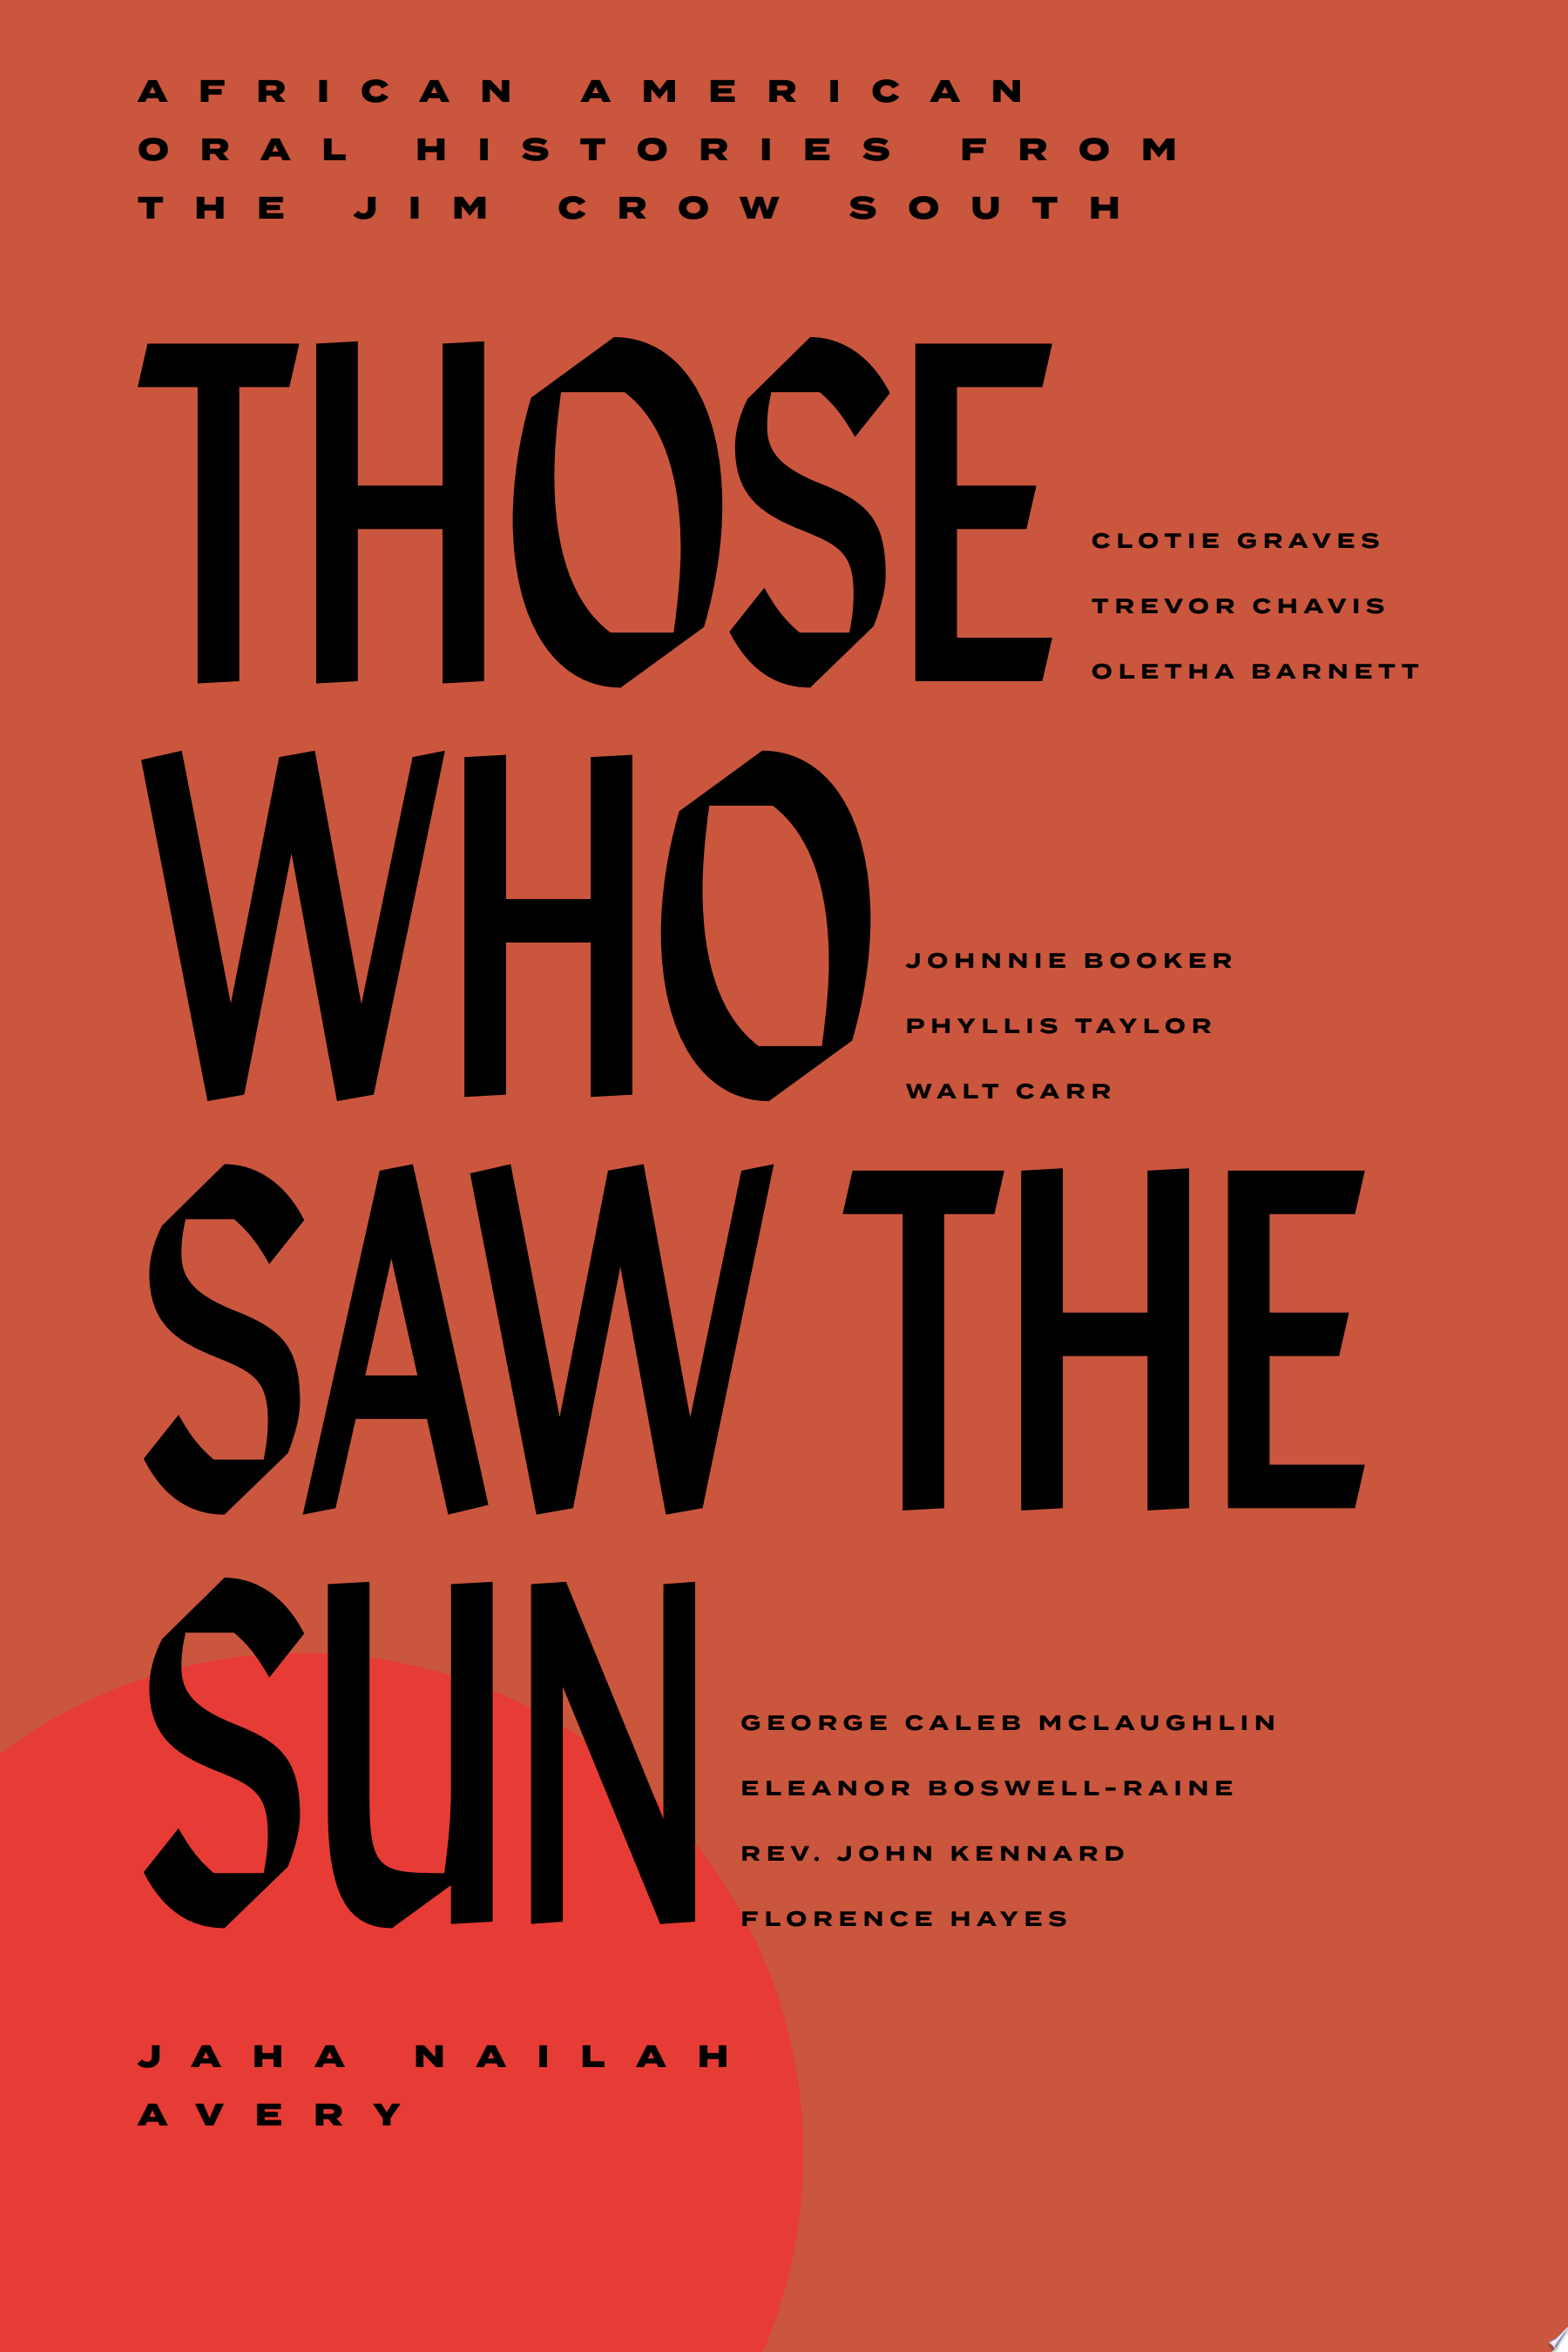 Image for "Those Who Saw the Sun"